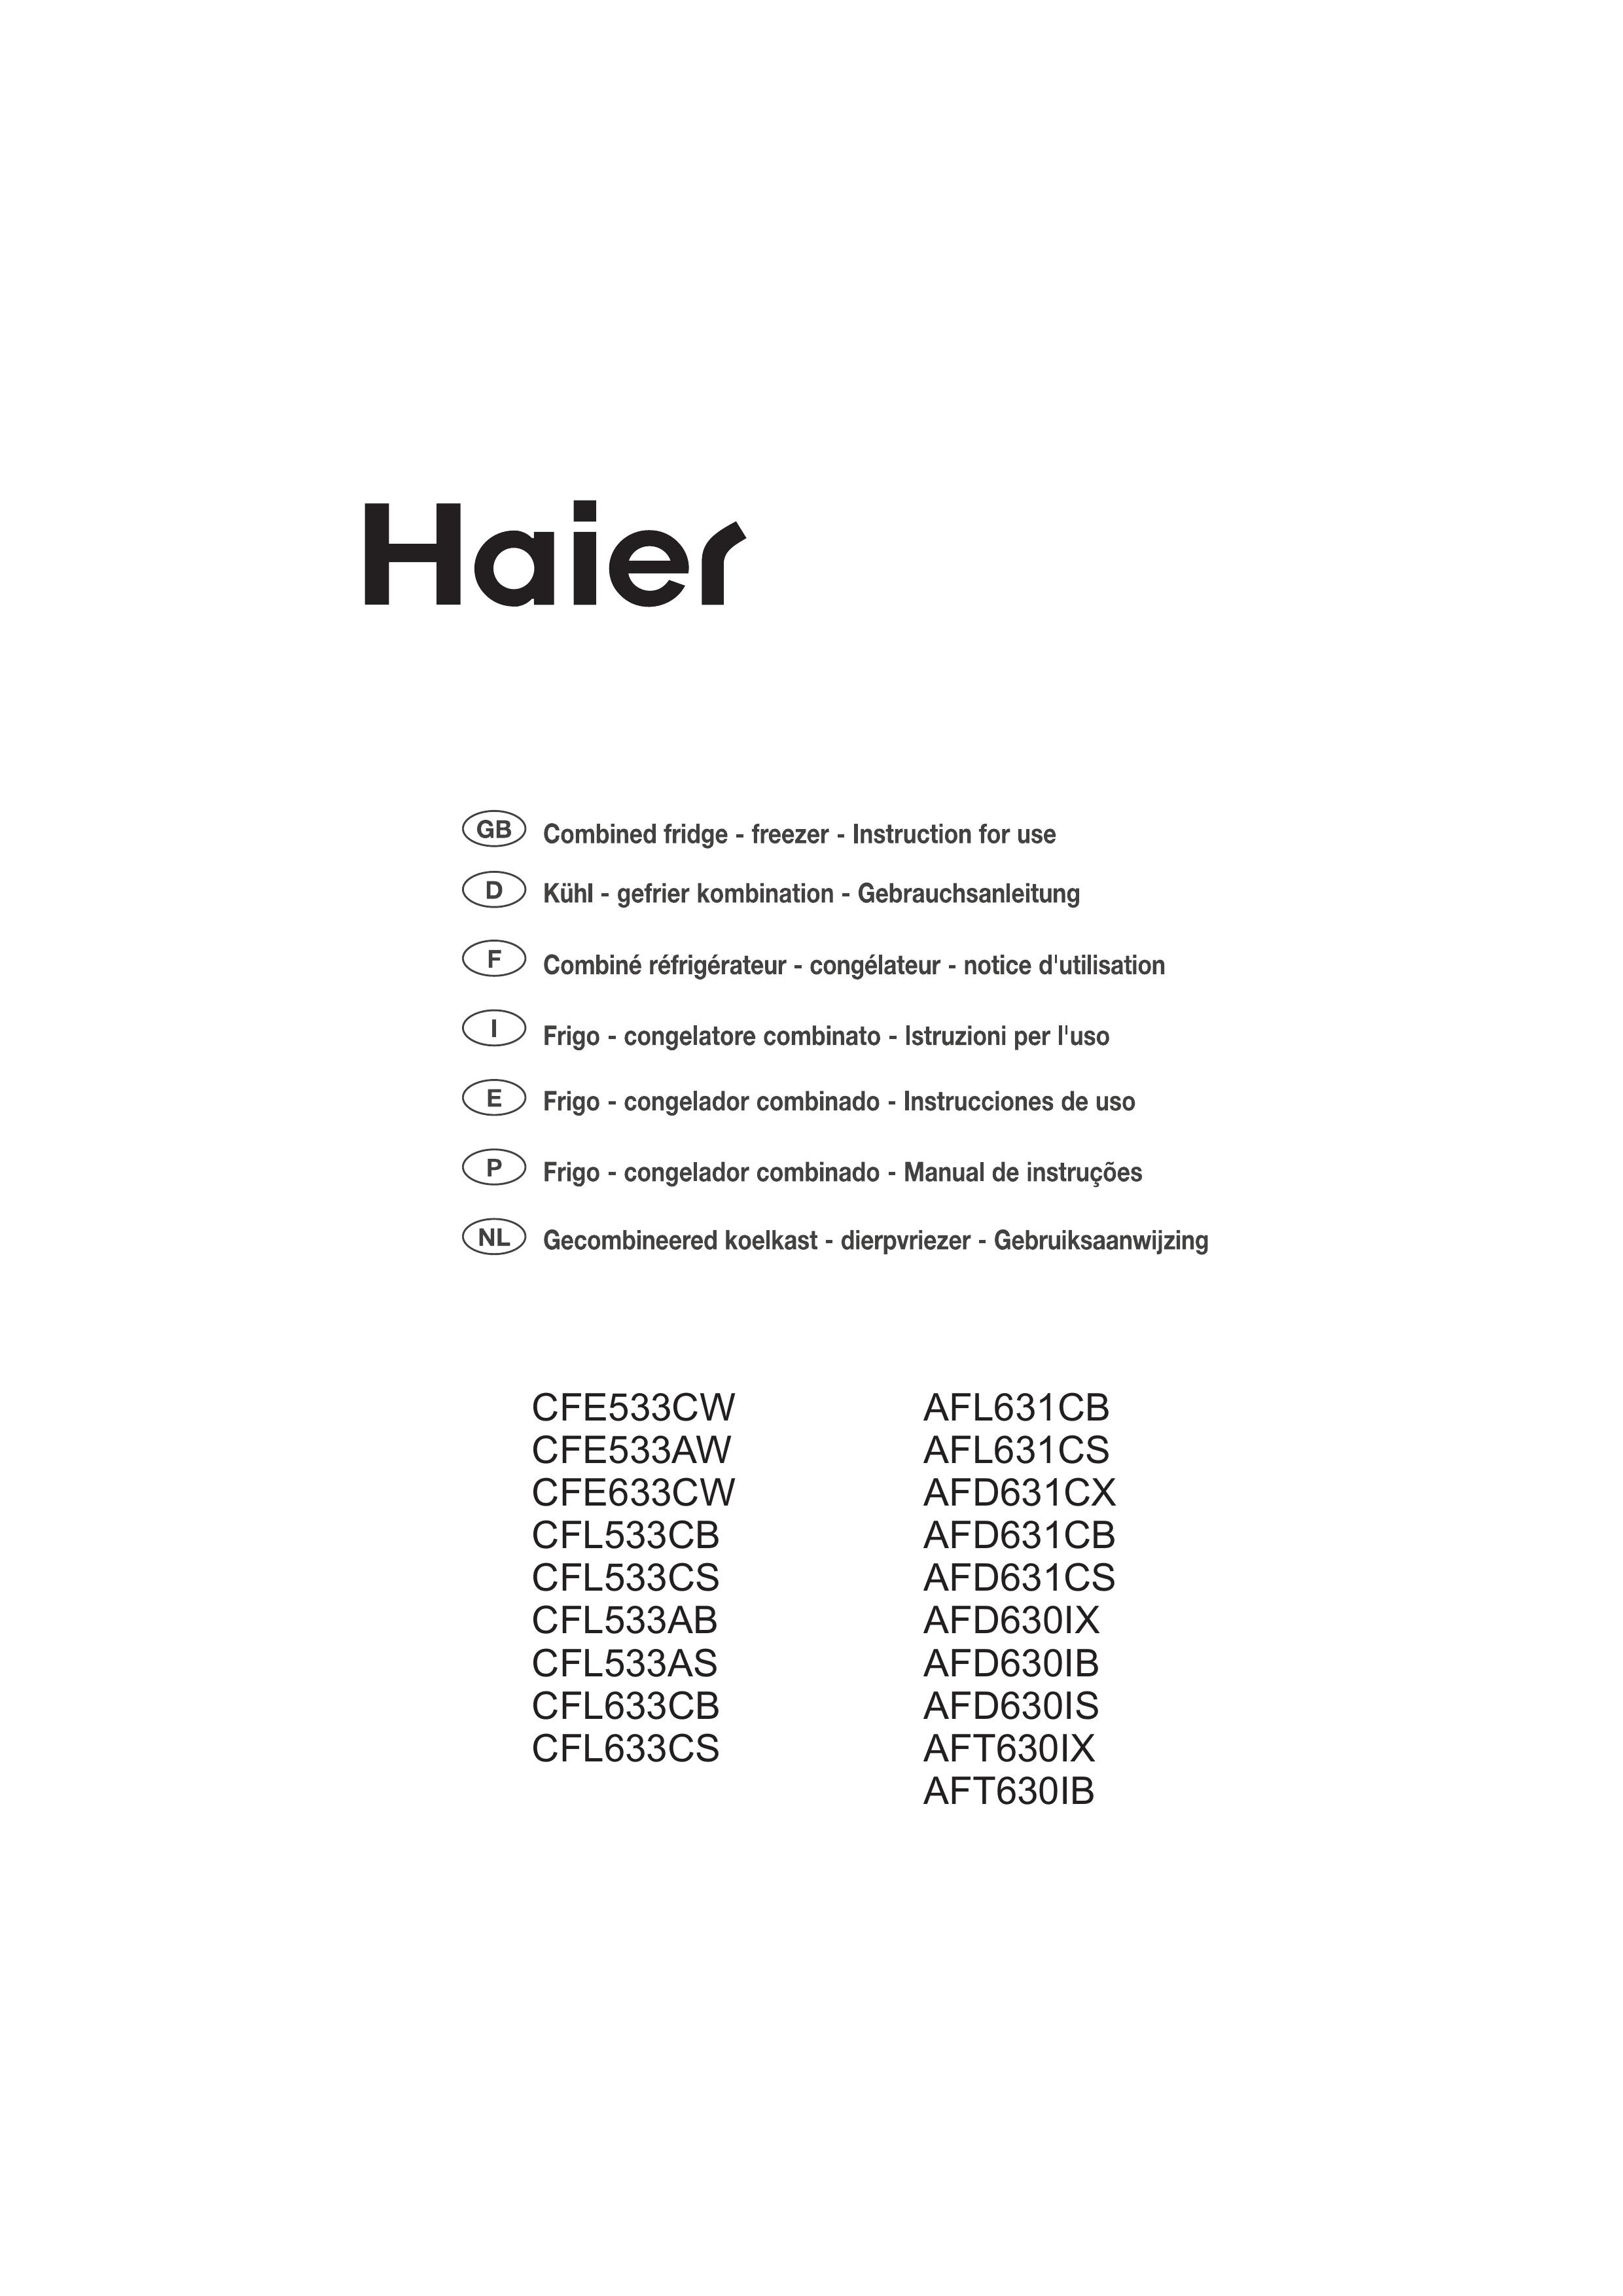 Haier AFD630IS Refrigerator User Manual (Page 1)